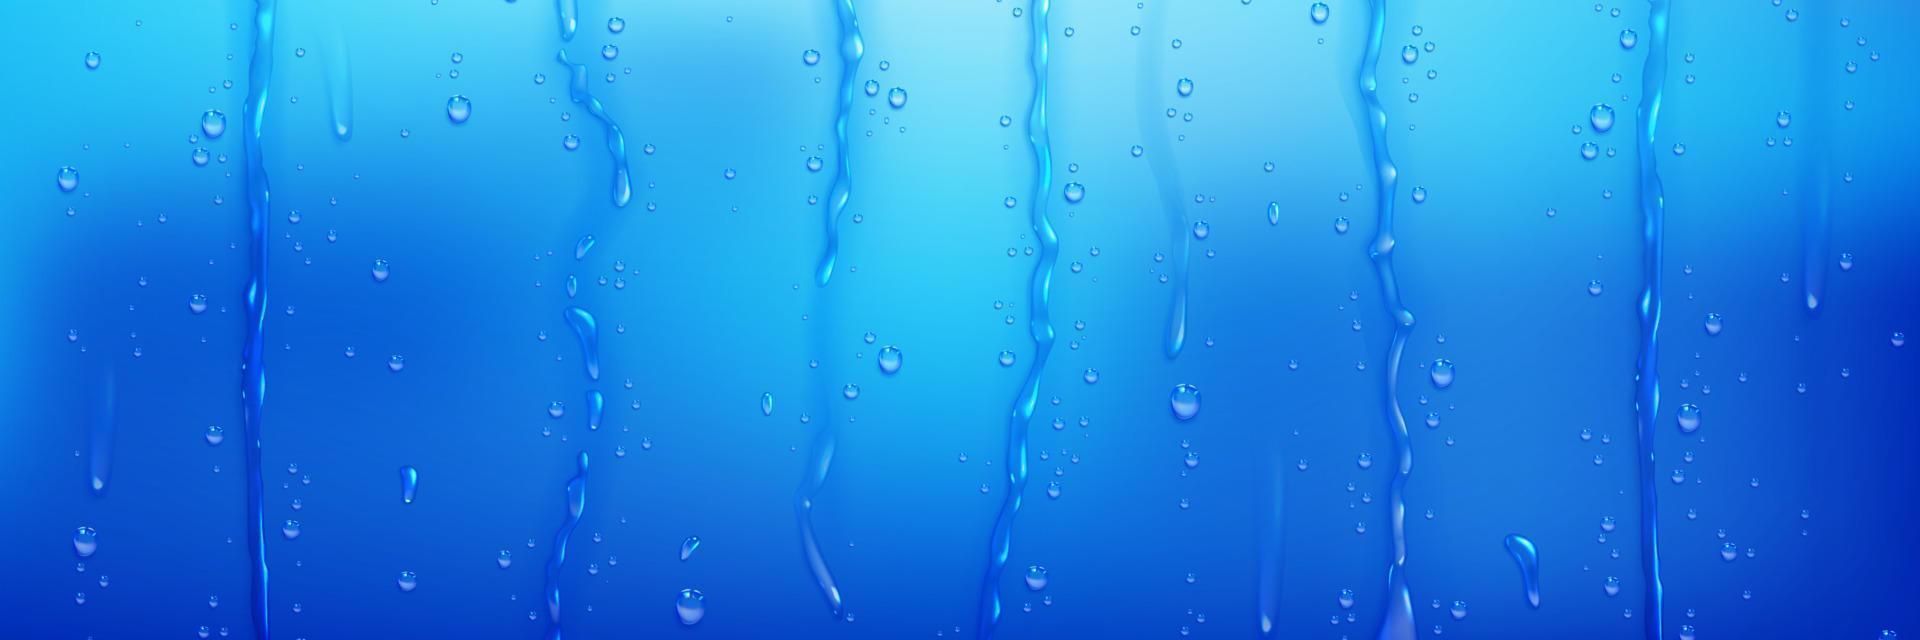 Water droplets and streams on blue surface vector